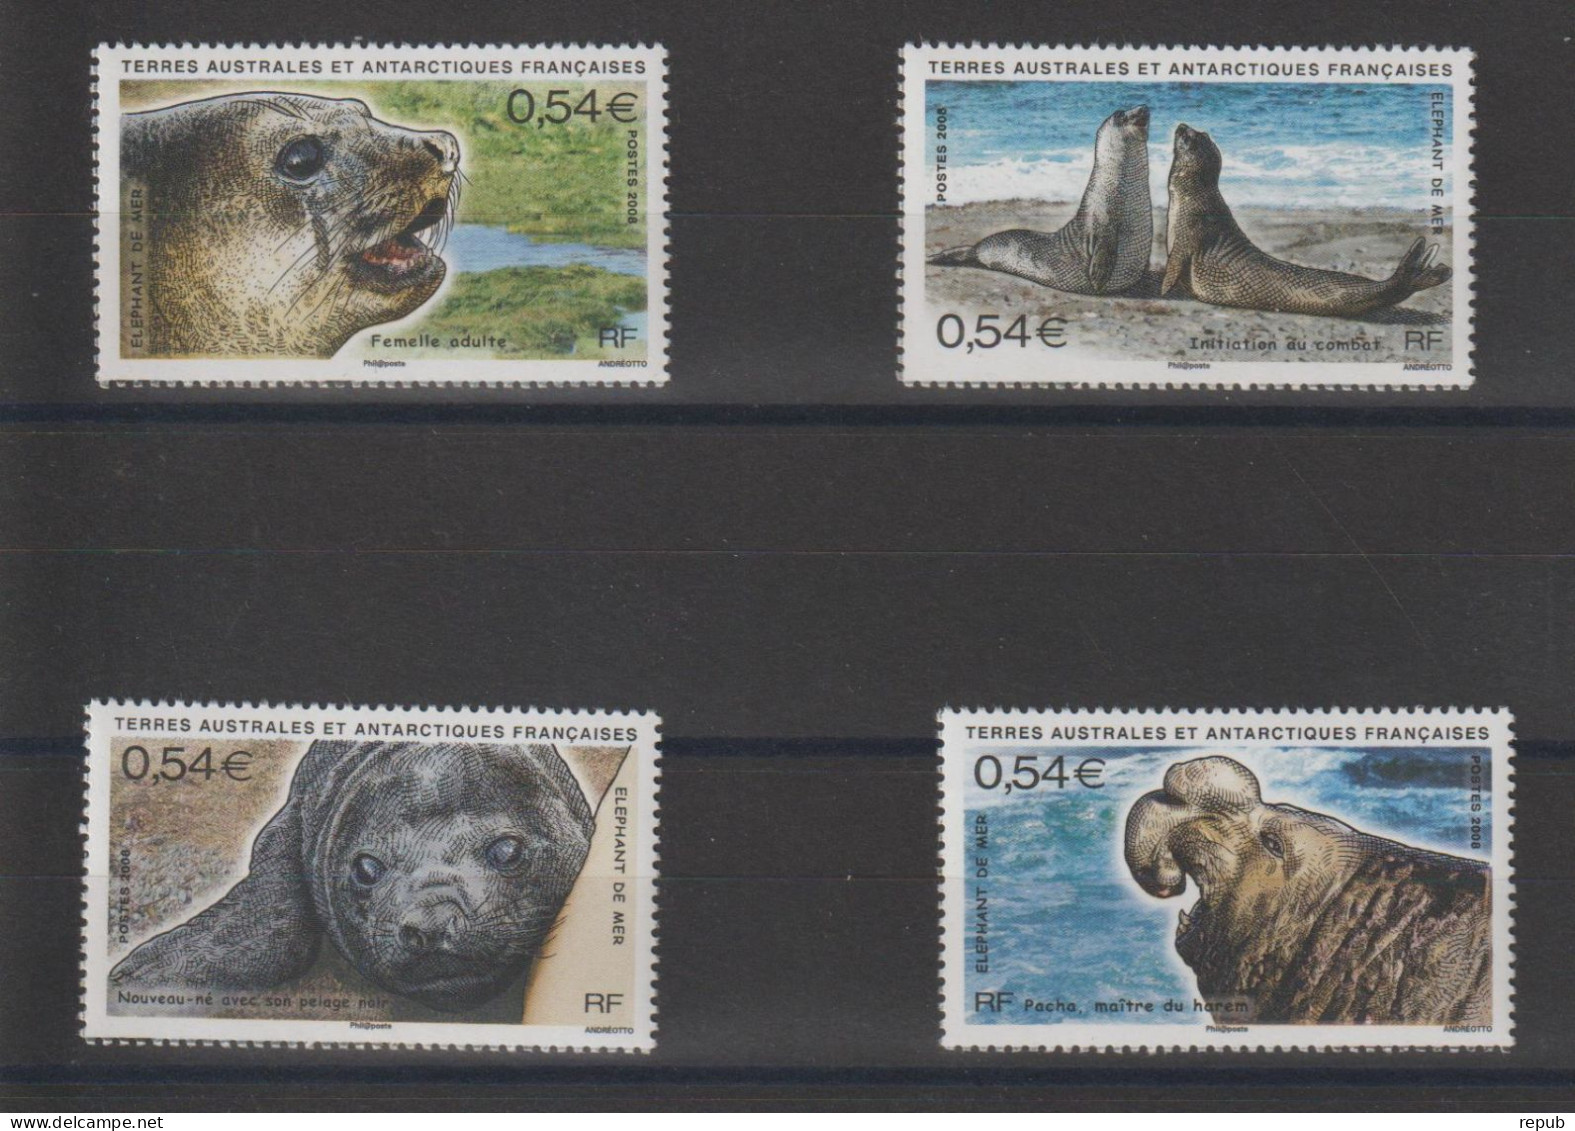 TAAF 2008 Timbres Issus Du BF 19, 508-511, 4 Val ** MNH - Ungebraucht